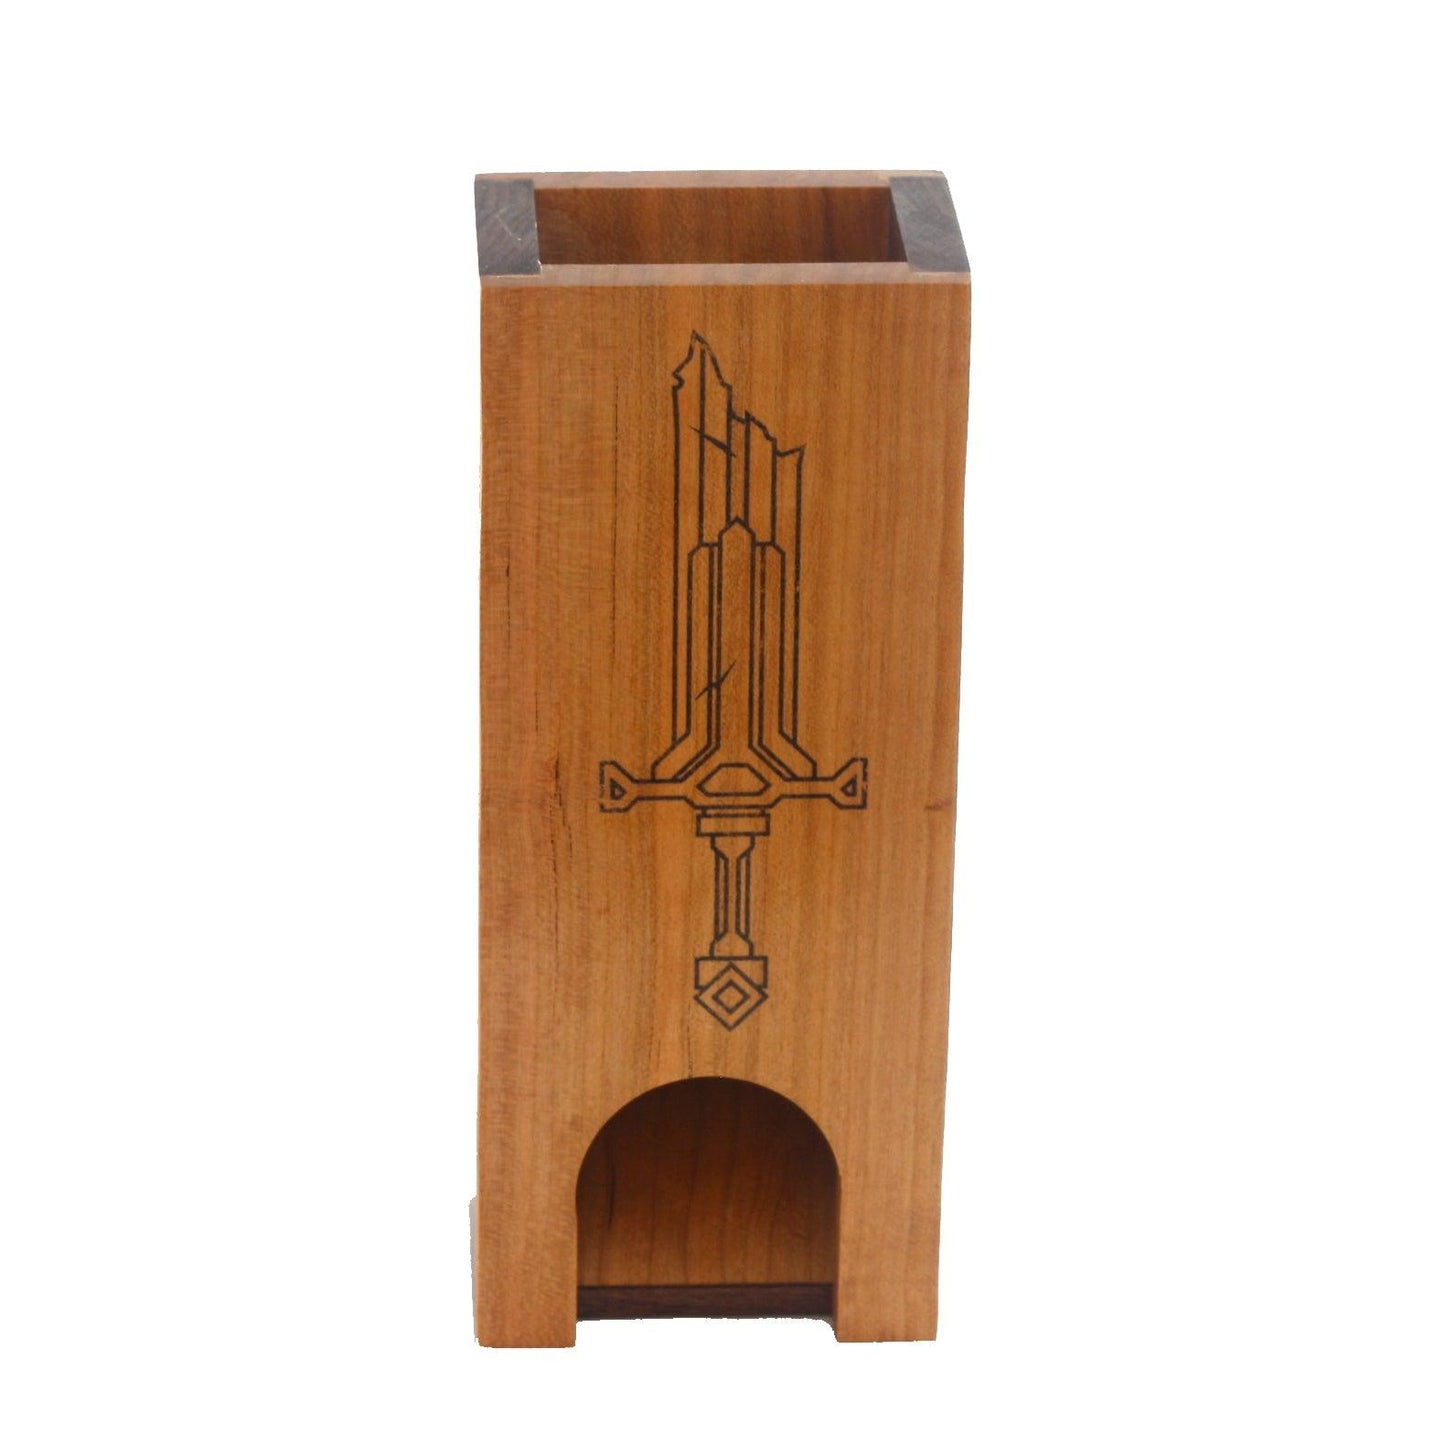 Premium hardwood dice tower made from cherry and walnut with our sword design on the front.  The front and back are made from cherry and the sides are walnut.